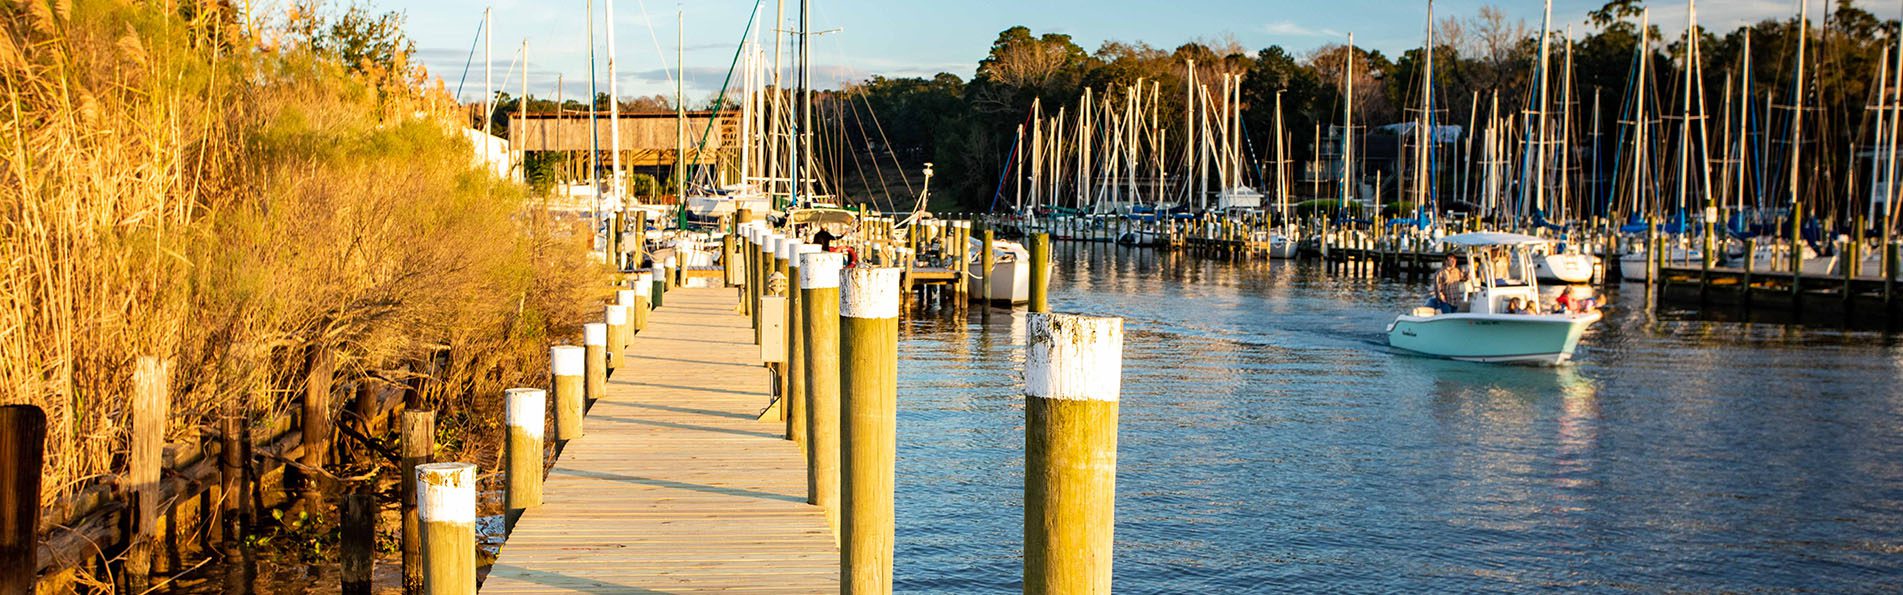 Fairhope Waterfront Project Moves Forward